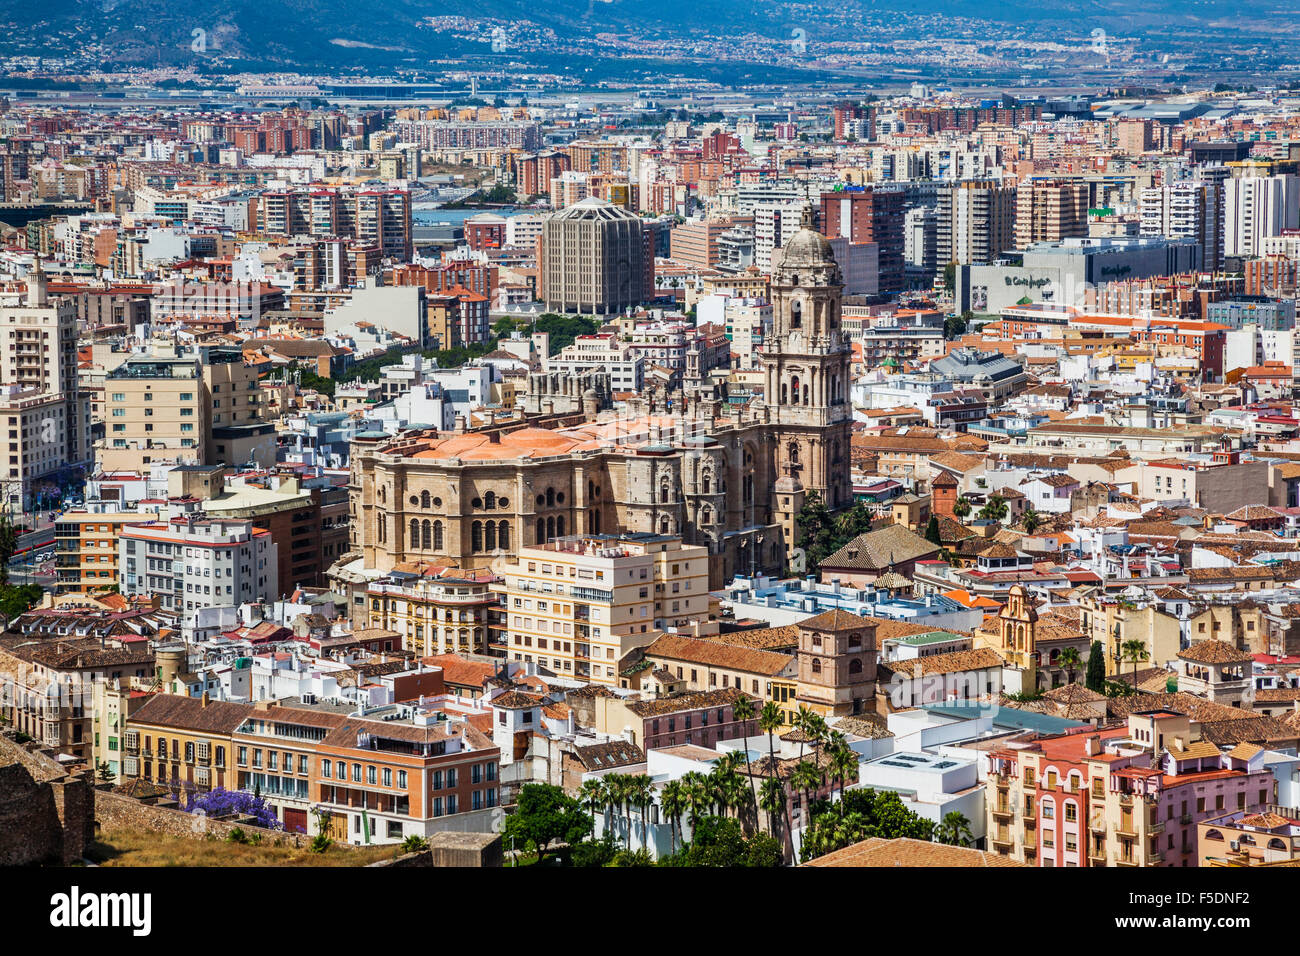 Spain, Andalusia, Malaga Province, view of Malaga's historic centre and cathedral Stock Photo